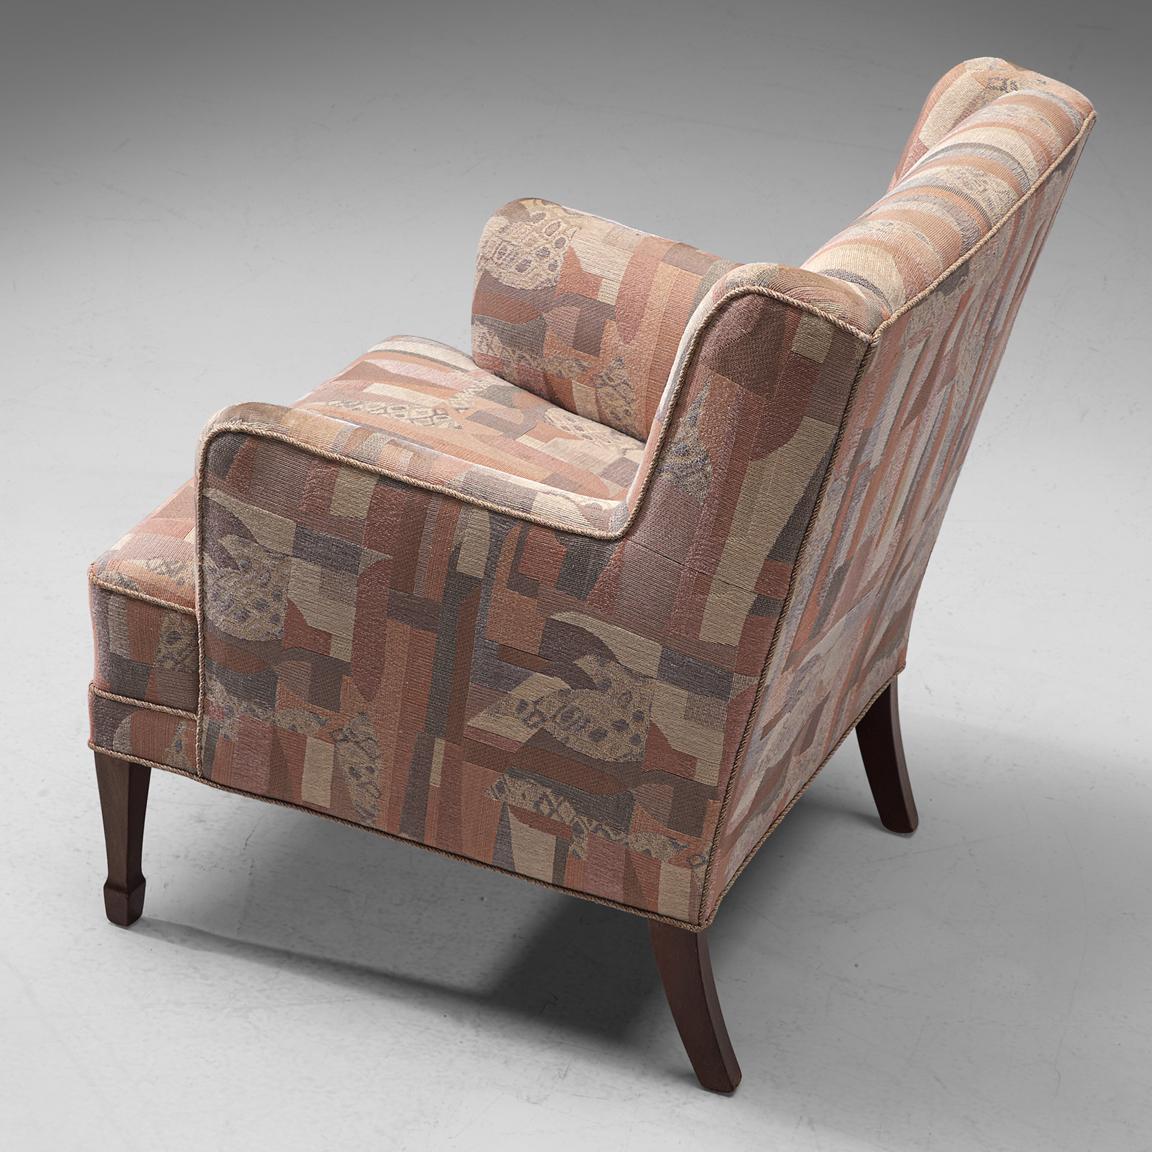 Danish Frits Henningsen Lounge Chair in Patterned Upholstery For Sale